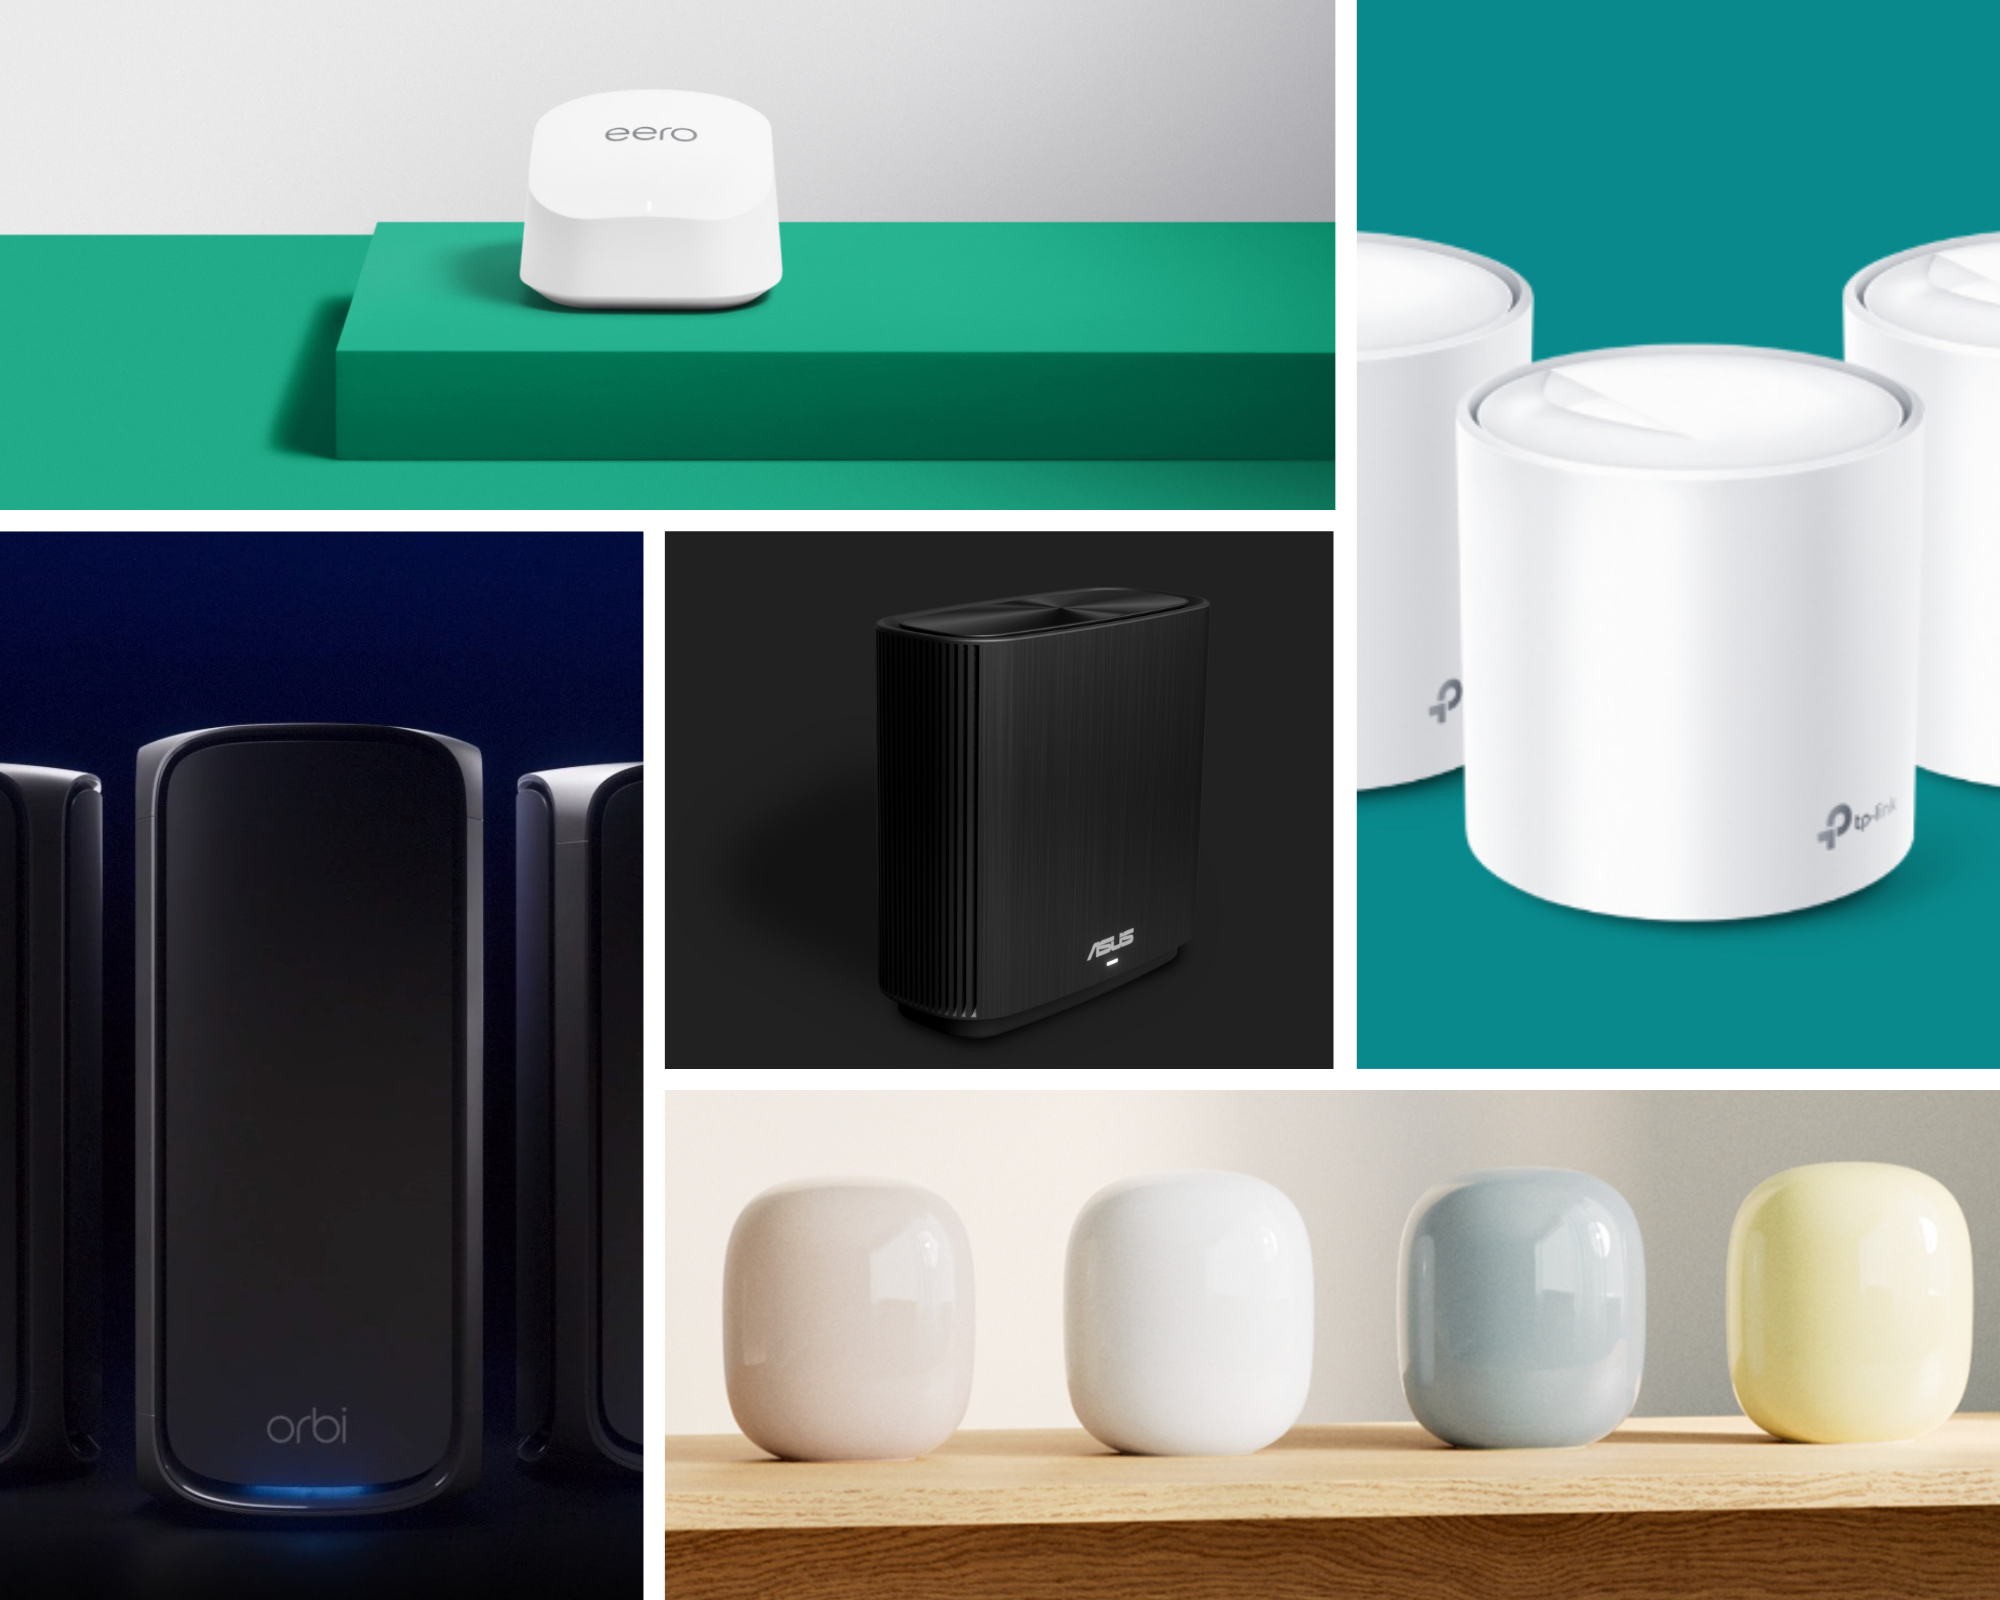 Collage of Wi-Fi mesh routers, including Orbi, Google, eero, Asus, and TP-Link devices.